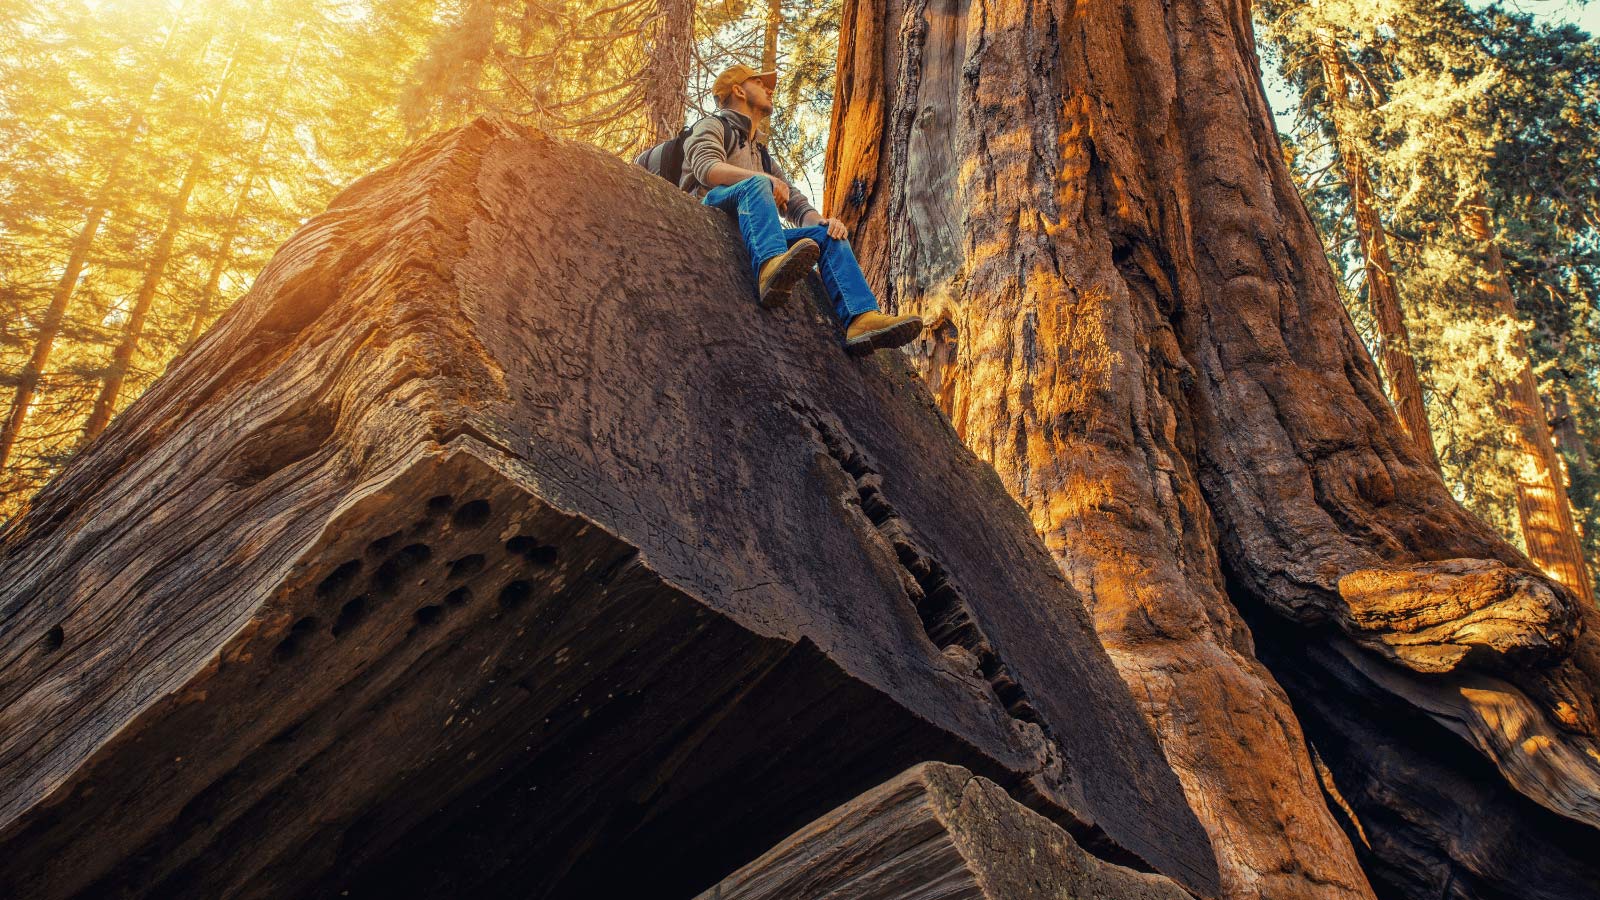 <p>Sequoia National Park is America’s second oldest national park and was established on September 25th, 1890. King’s Canyon was established in 1940, and the two parks are located side by side east of Fresno.</p>